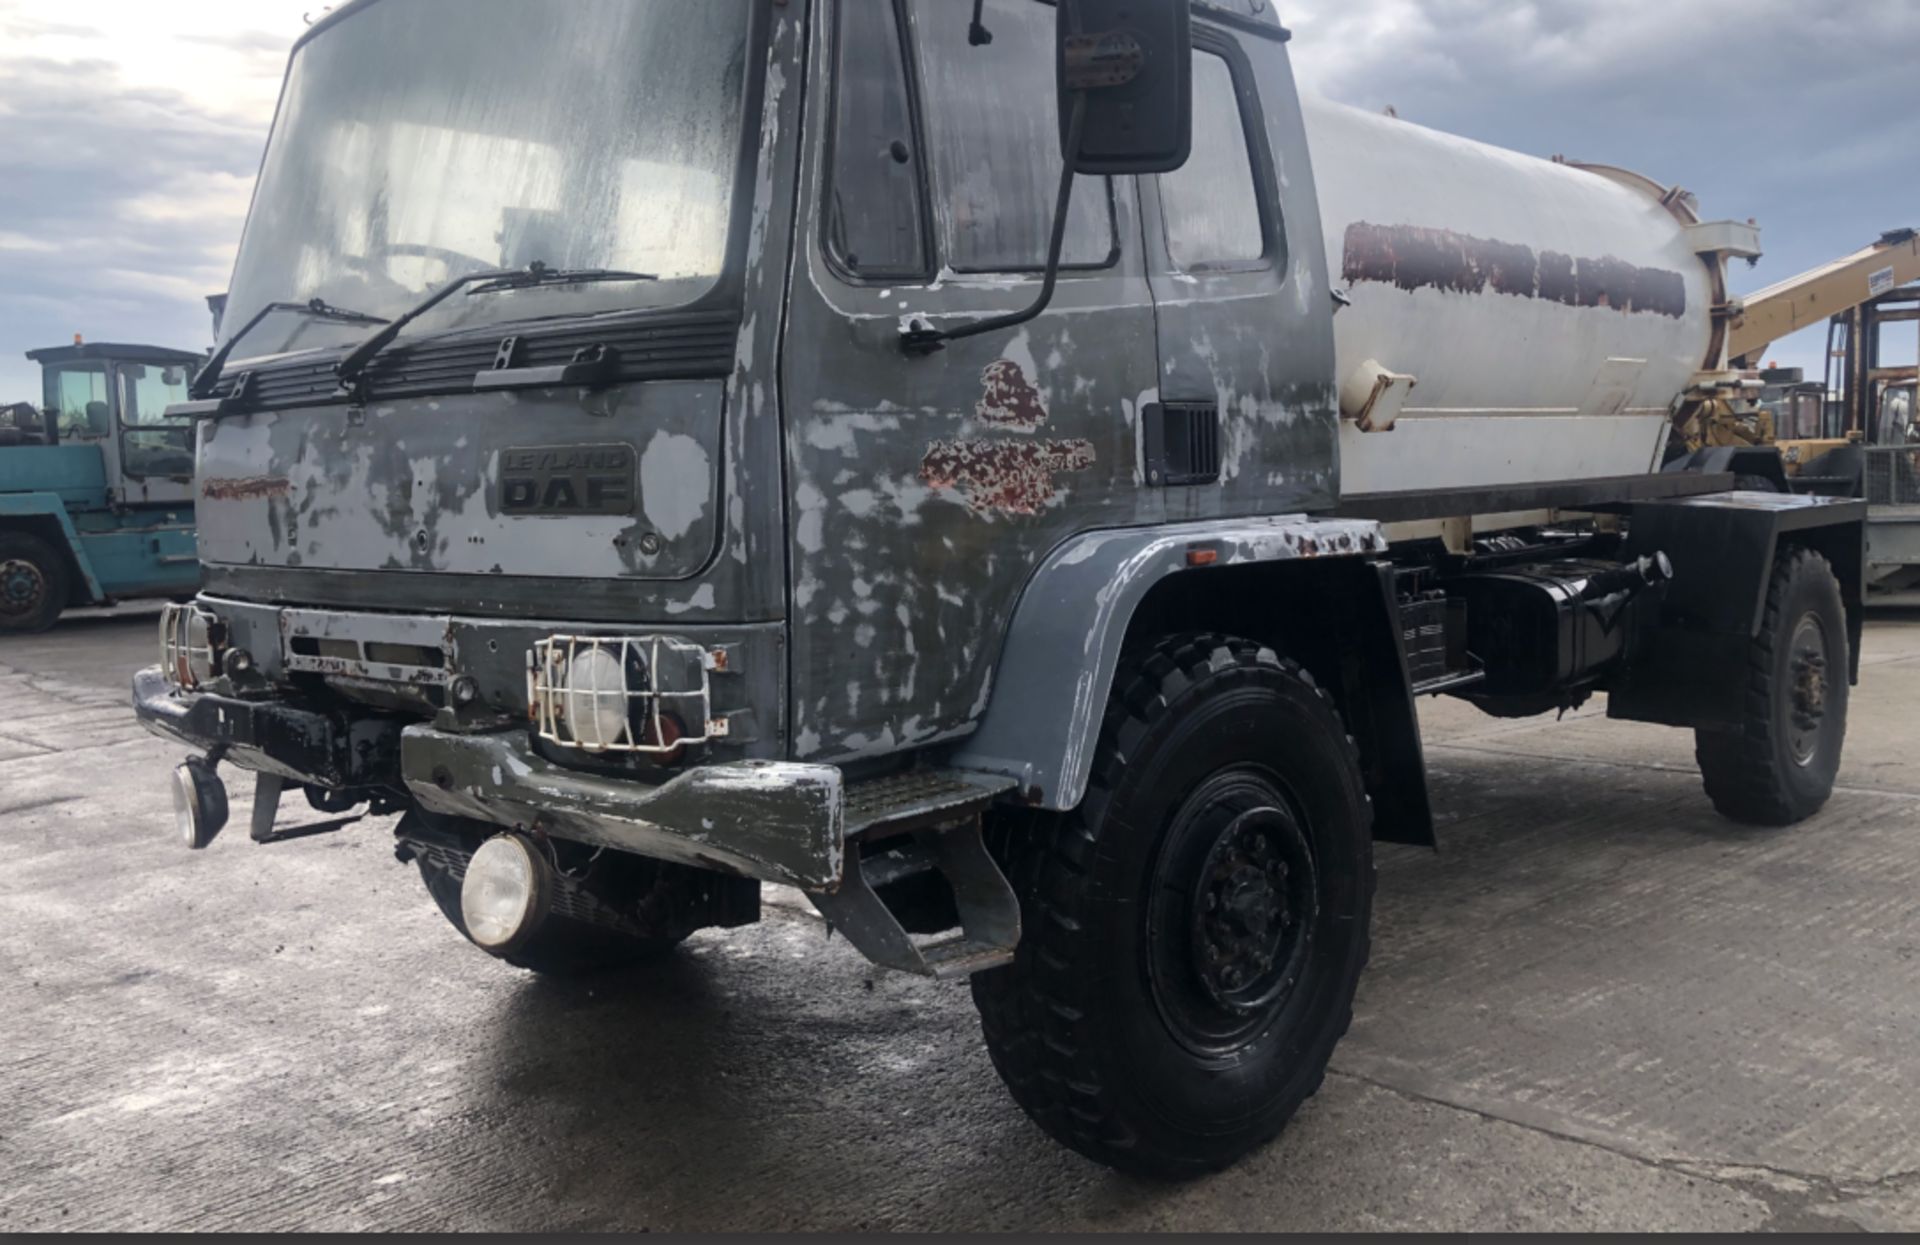 DAF T45 ,4×4 WATER BOWSER TRUCK